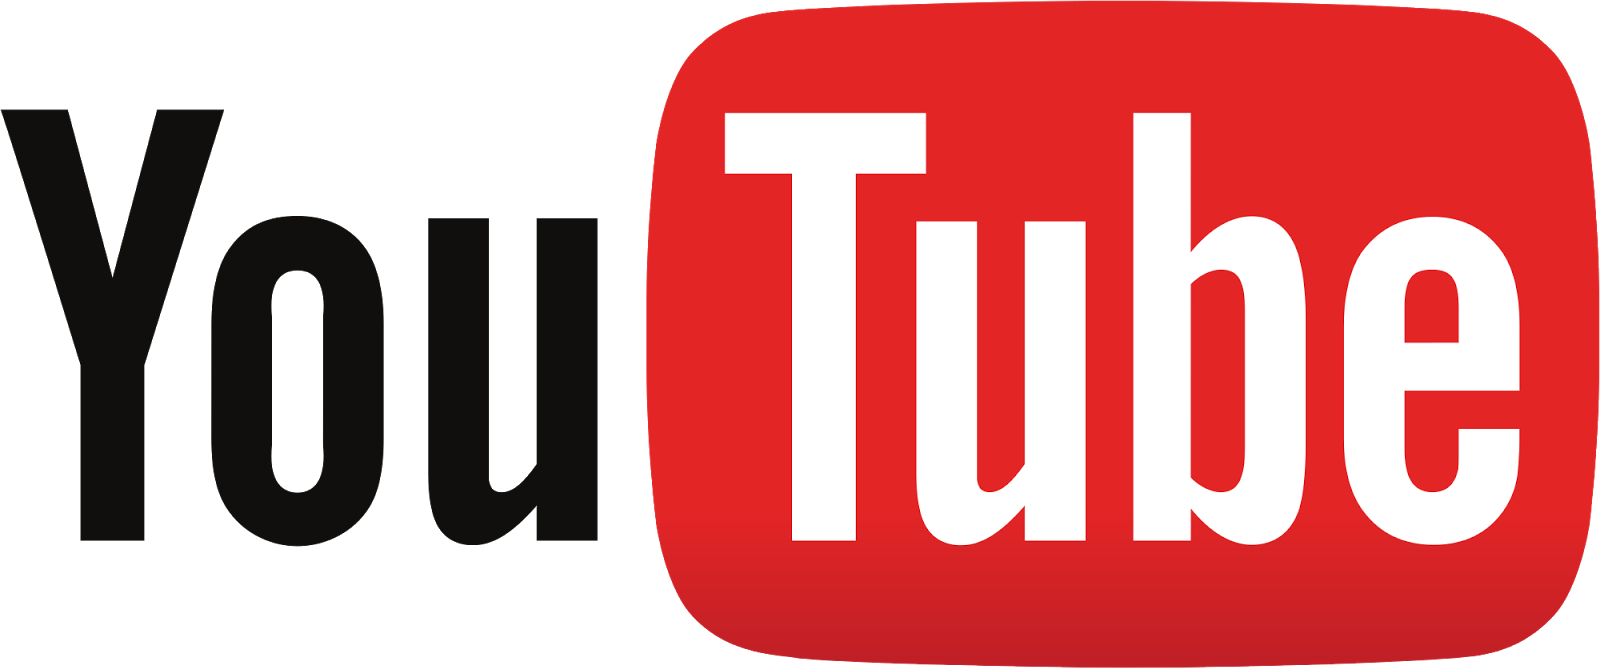 World Famous Video Sharing Site YouTube to Launch Paid Music Service